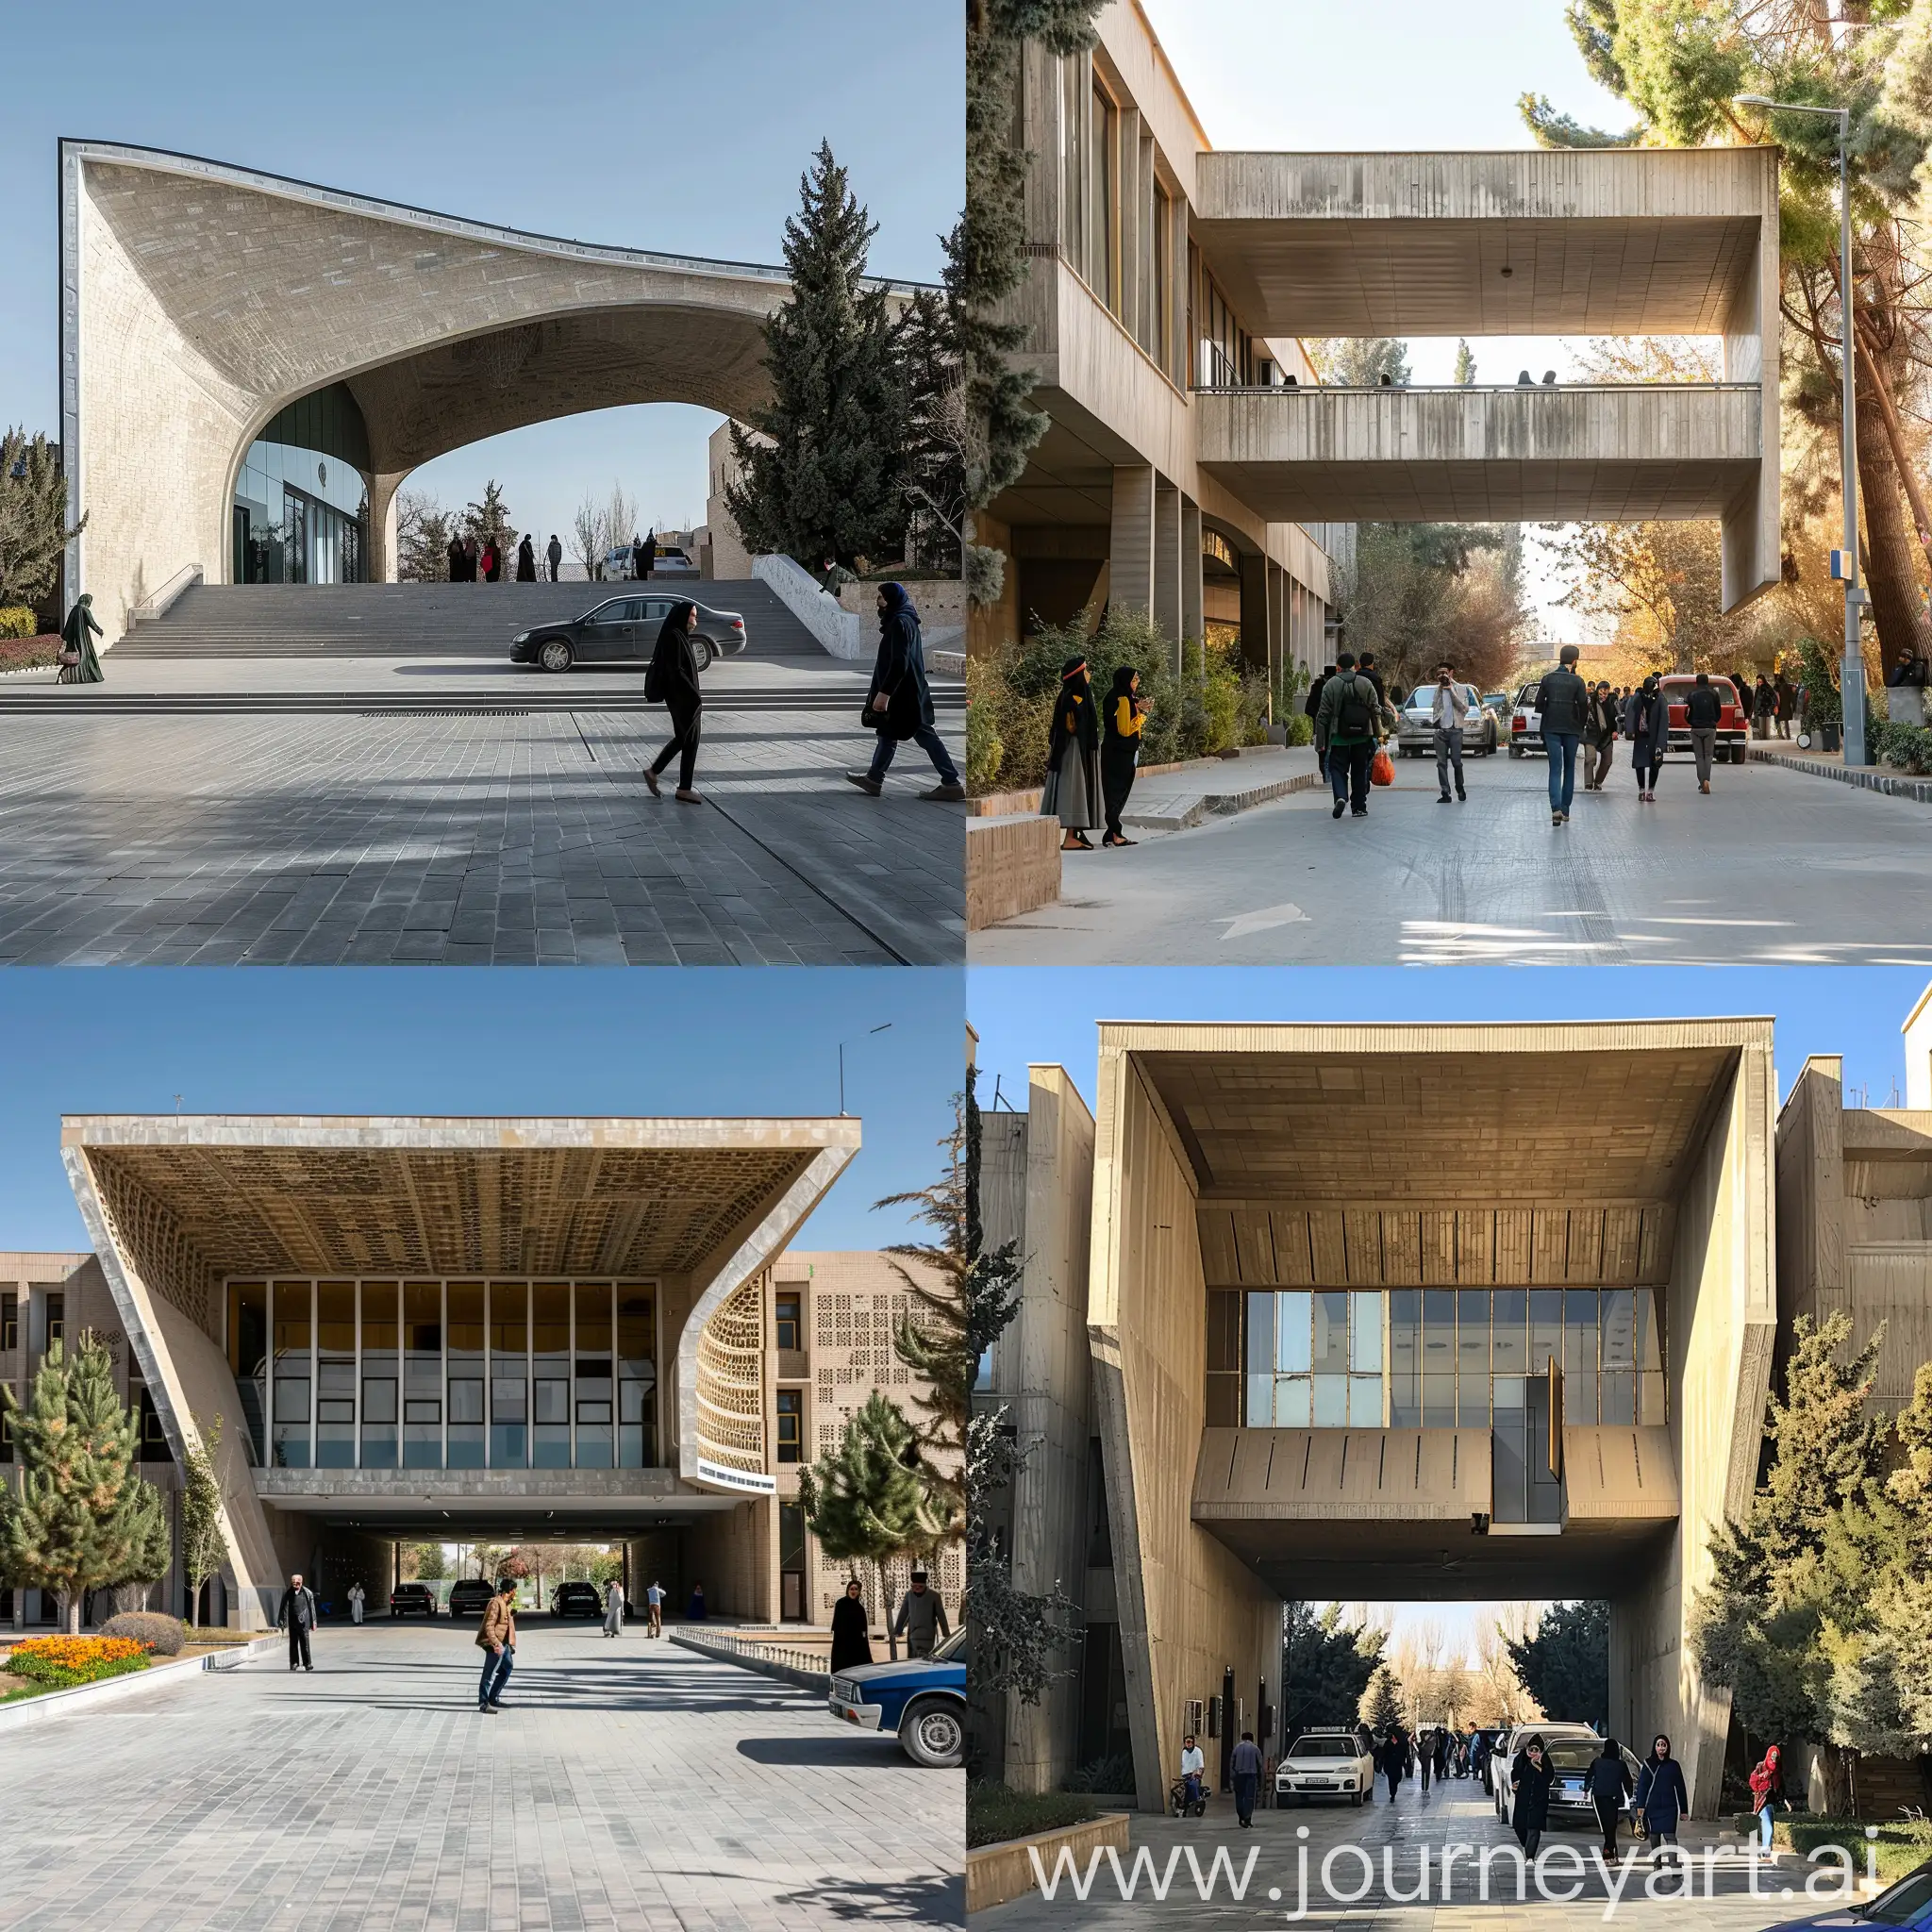 modern university entrance in iran with car and pepole